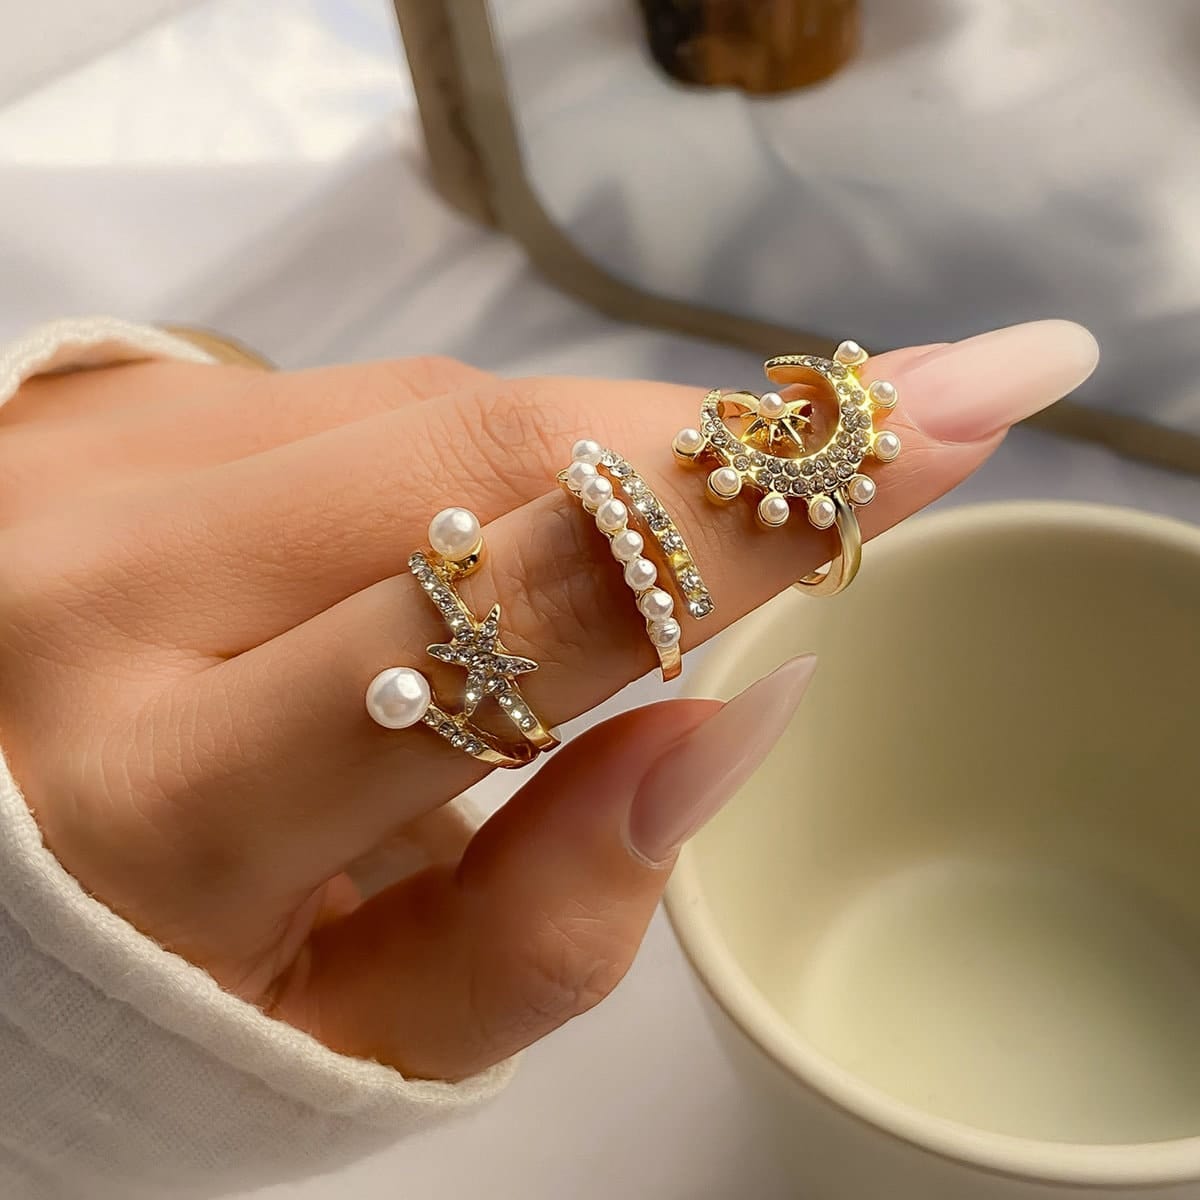 3 Pearl Decor Ring Set, Suitable For Daily Wear And Party, With Simple And  Stylish Design Elements